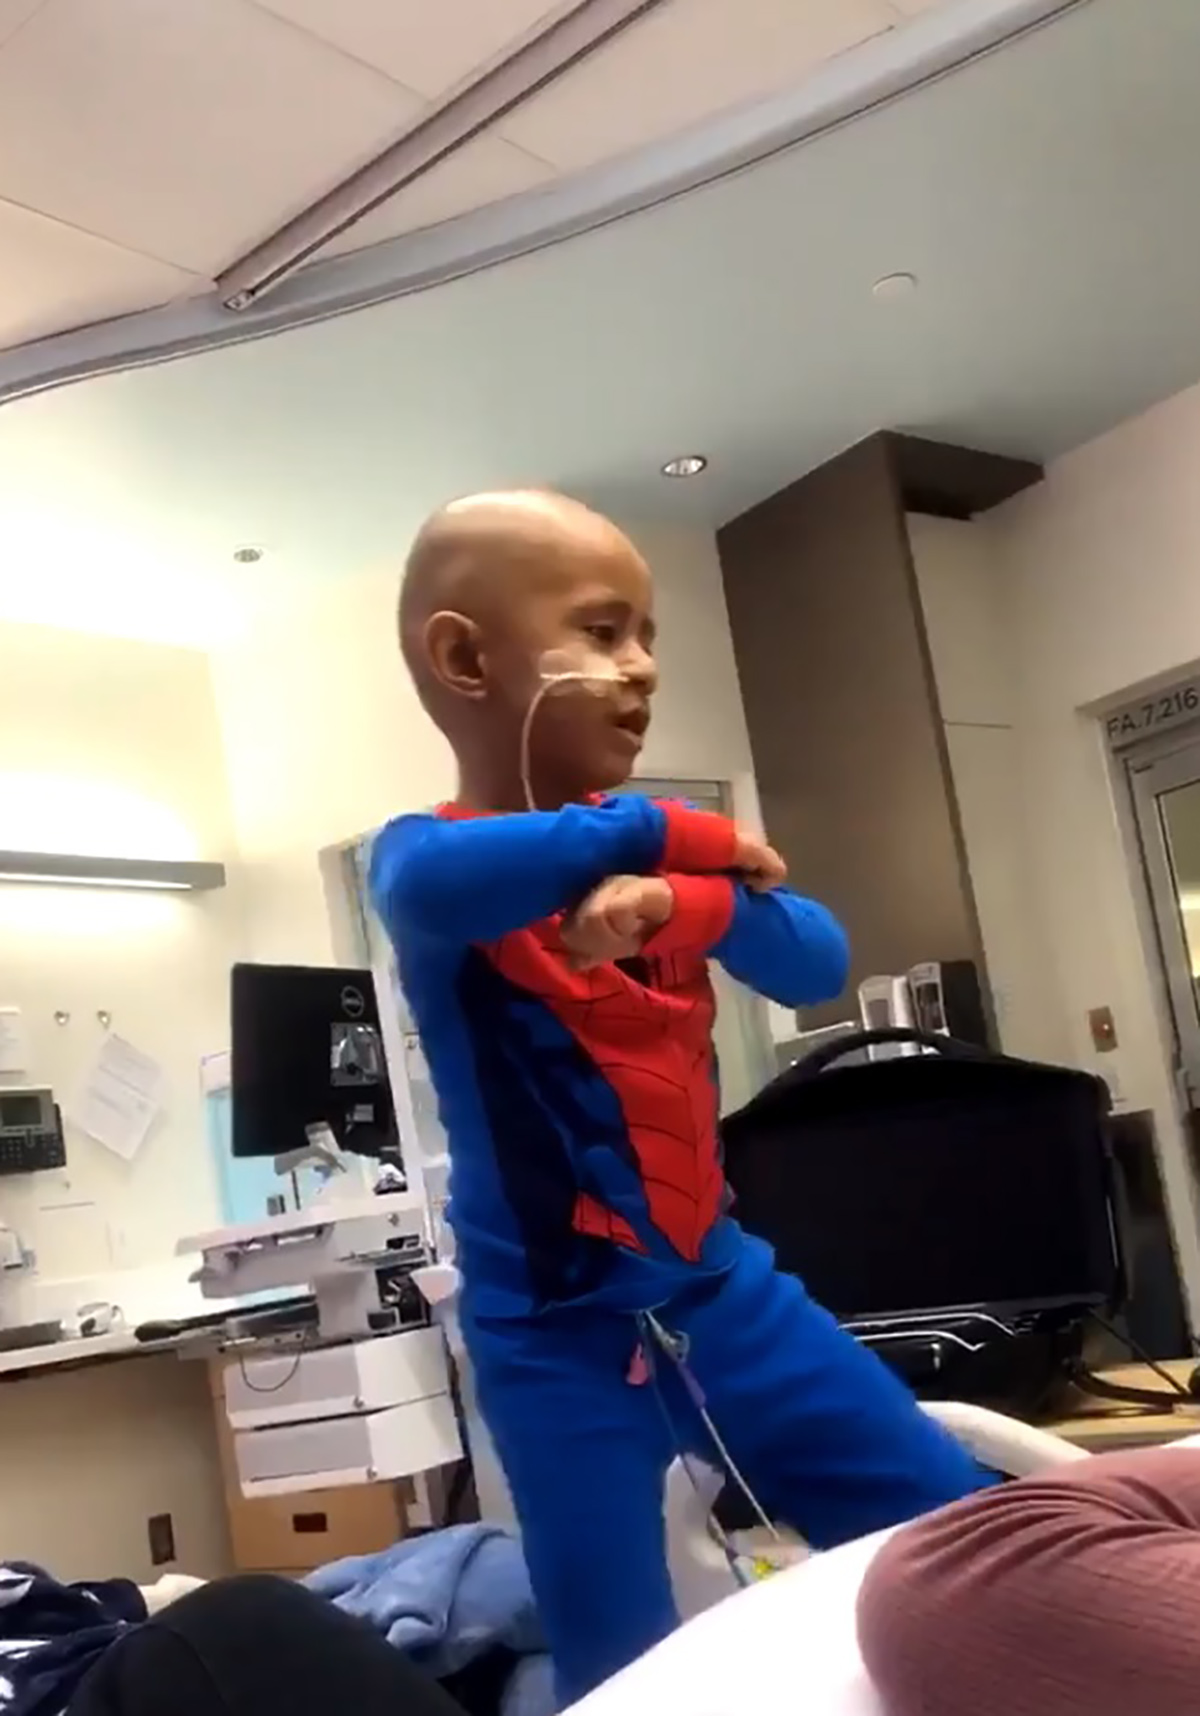 PHOTO: Solomon Haufano, 5, is spreading smiles with his epic Michael Jackson dance moves while he receives treatment to fight cancer at Seattle Children's Hospital.